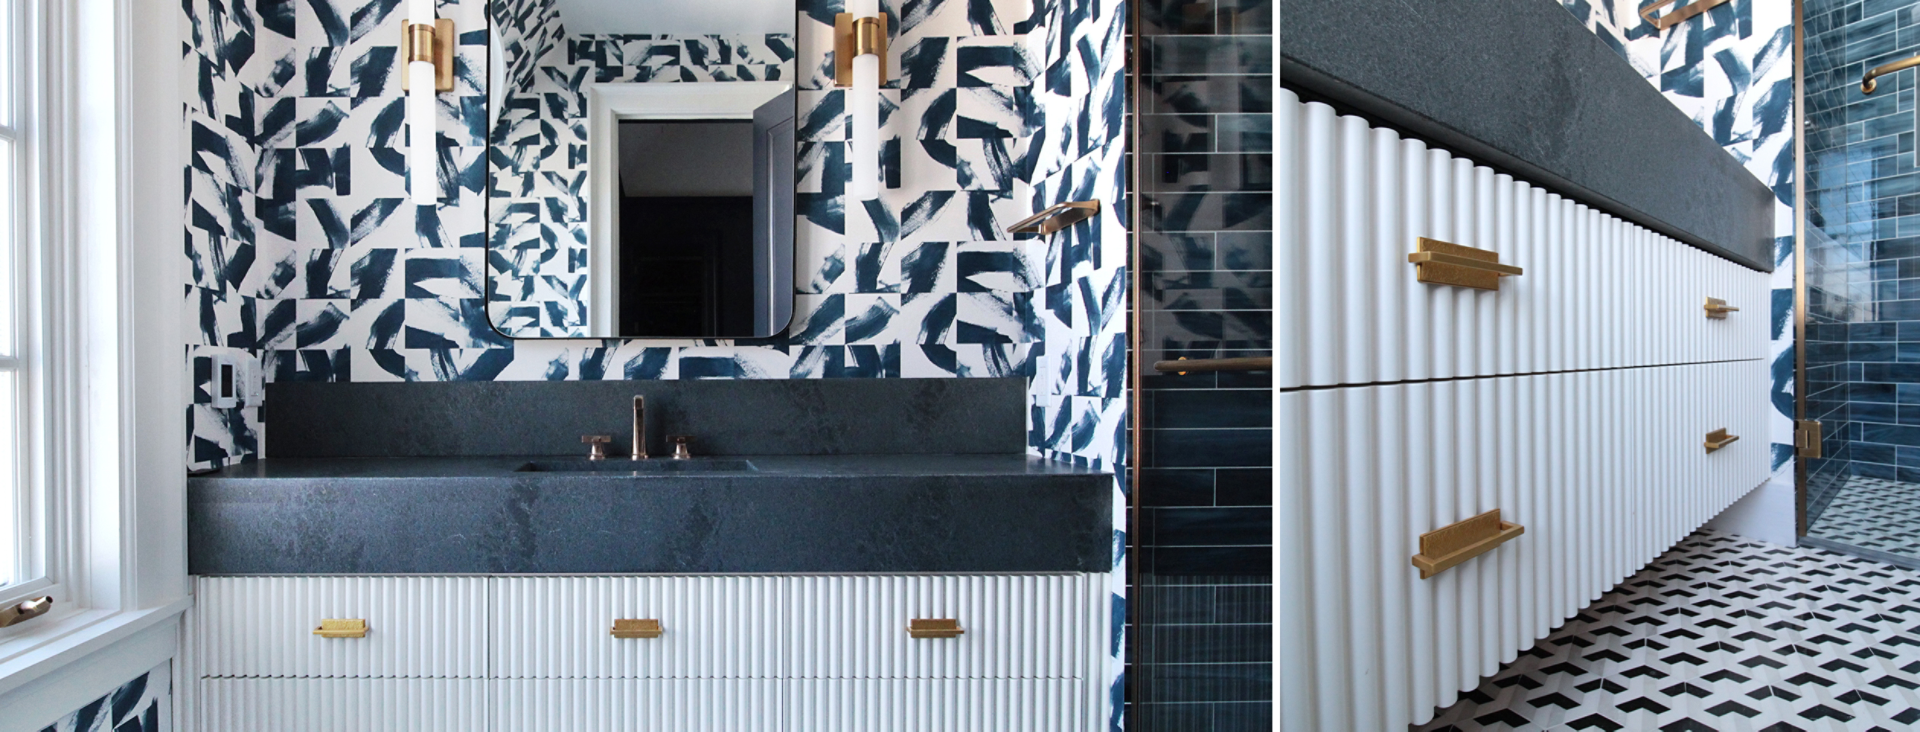 Full view and angled closeup of fluted white vanity with dark countertop and bold patterned wallpaper, dark blue tiled walk-in shower at right.